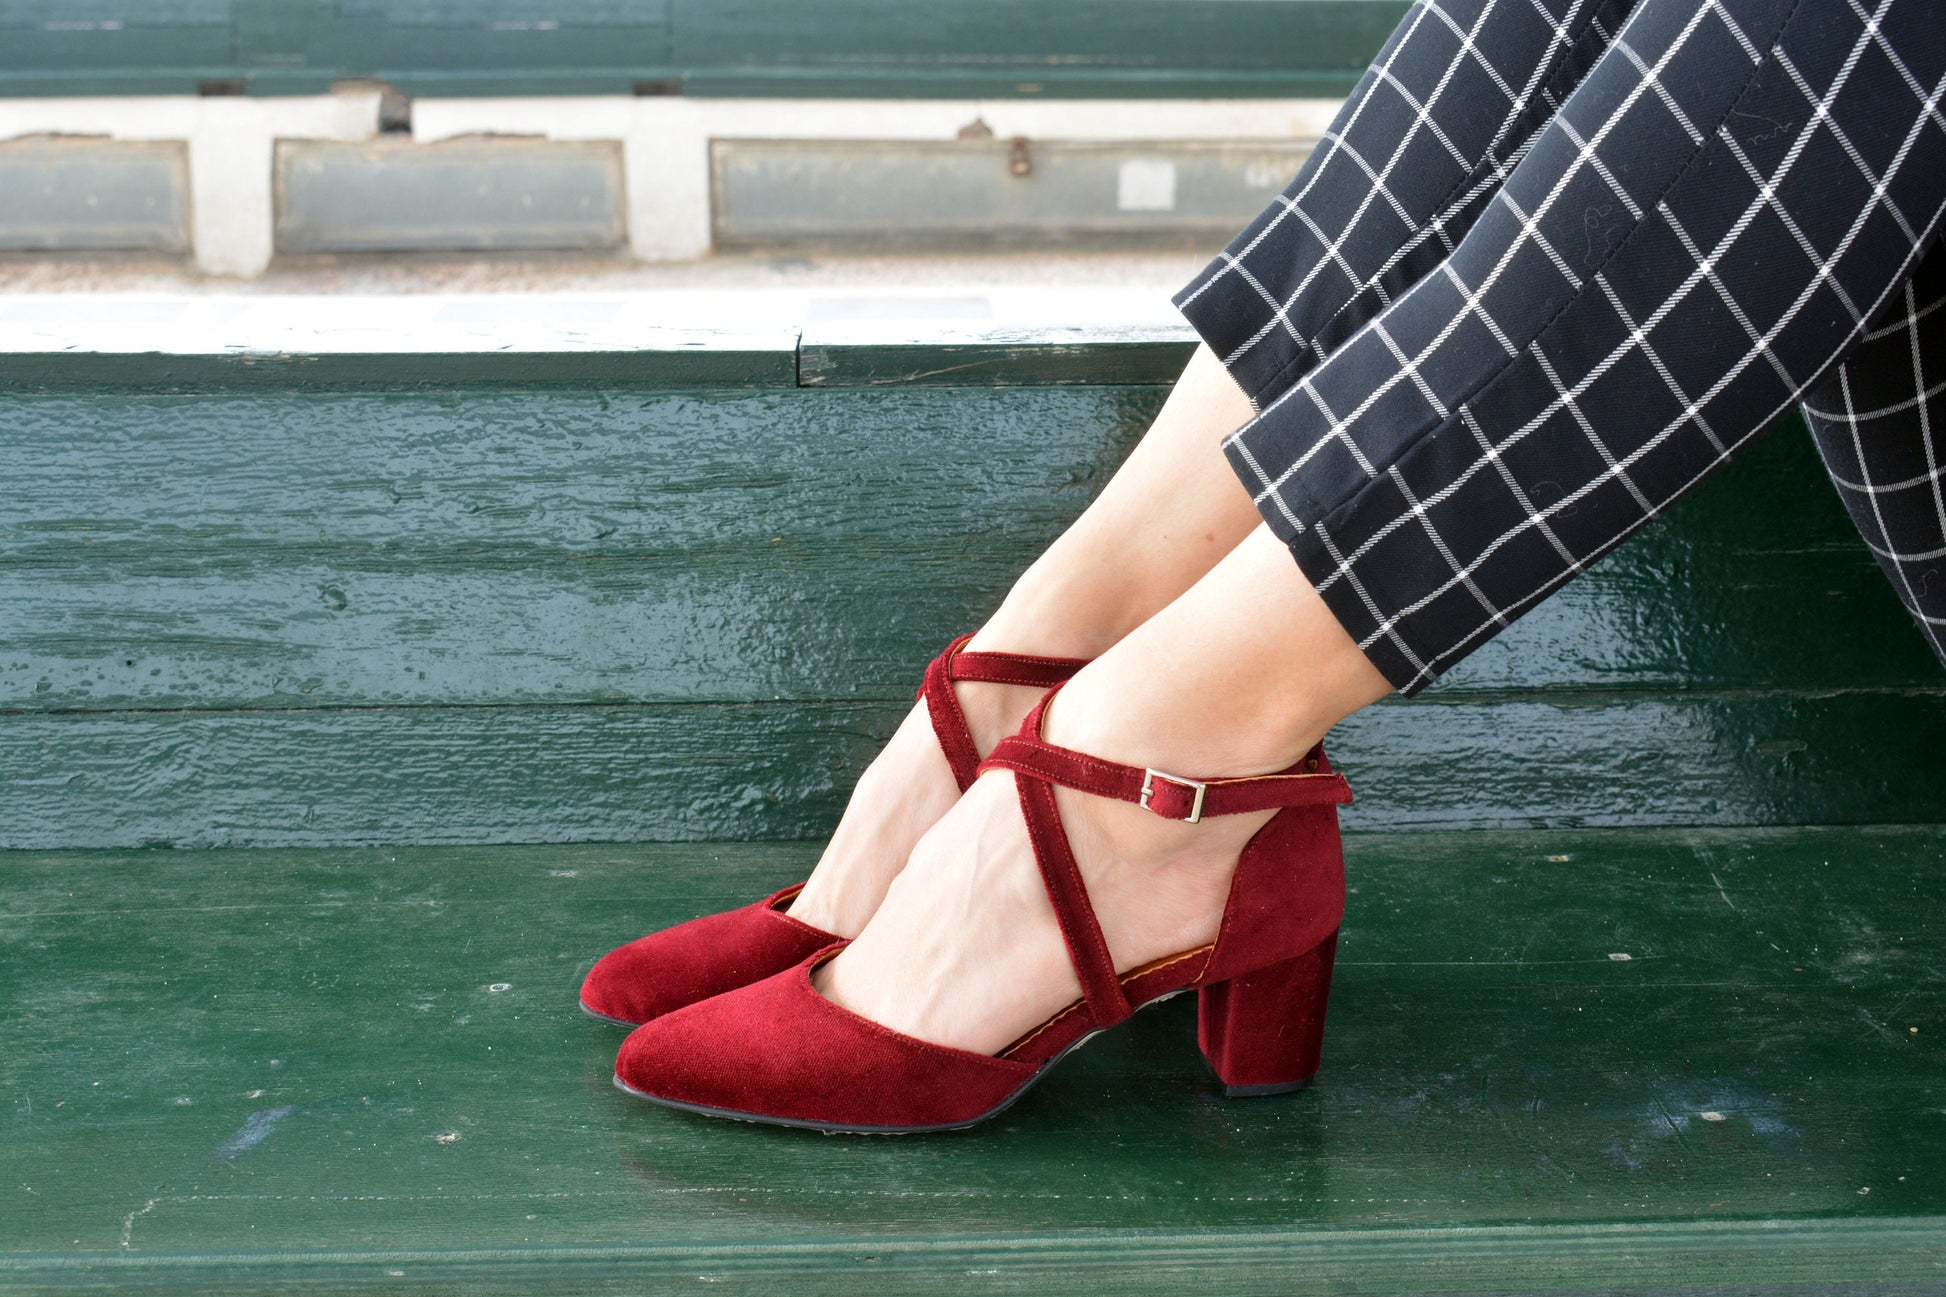 What color shoes should I wear with a Maroon dress? - Quora